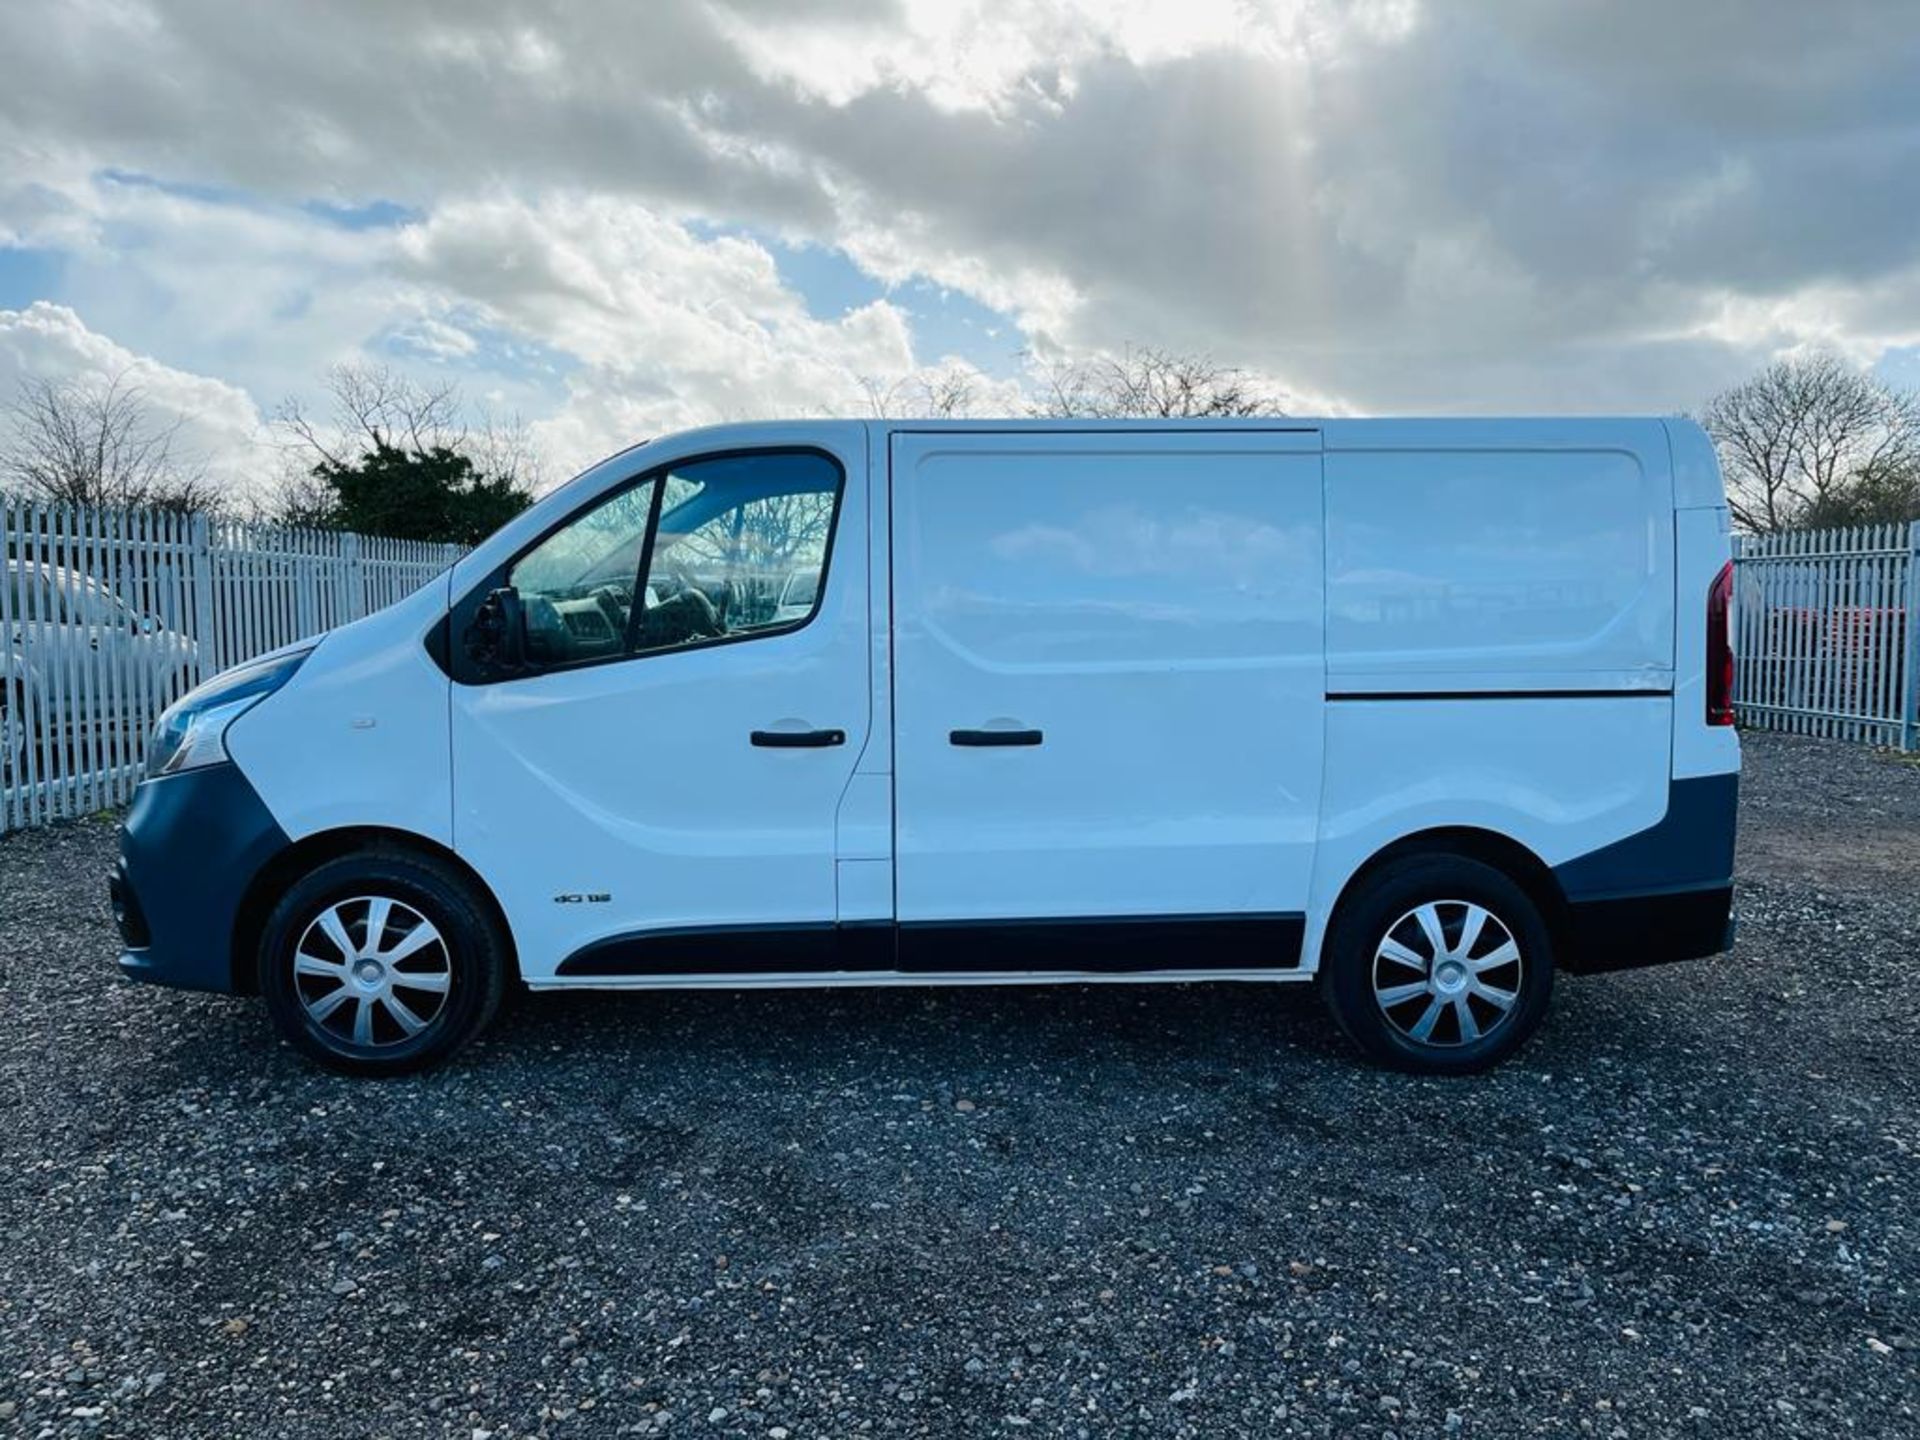 ** ON SALE ** Renault Trafic SL27 Business + 1.6 DCI 115 L1 H1 2016 '16 Reg' -A/C- Only 69794 Miles - Image 4 of 25